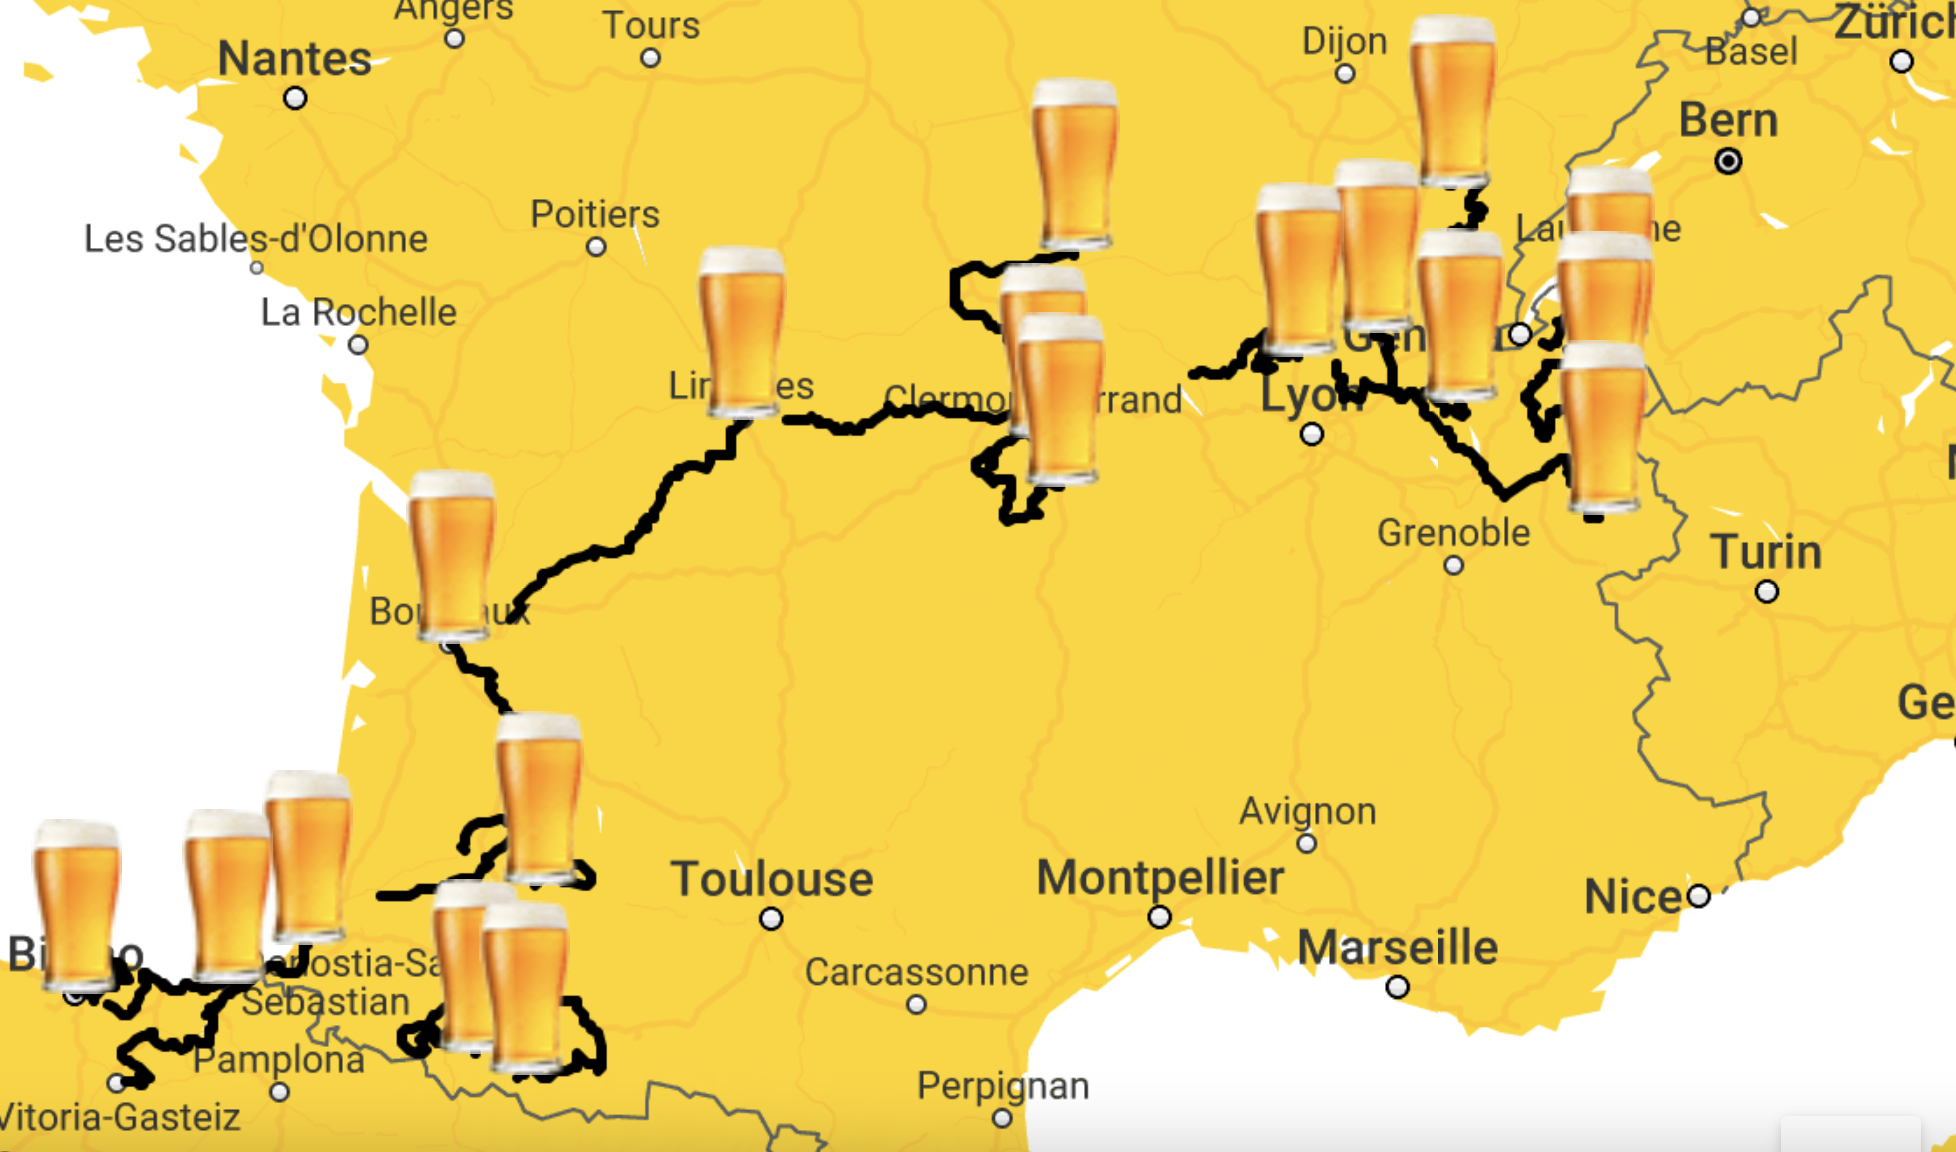 yellow map showing the tour de france, but our of beer glass icons